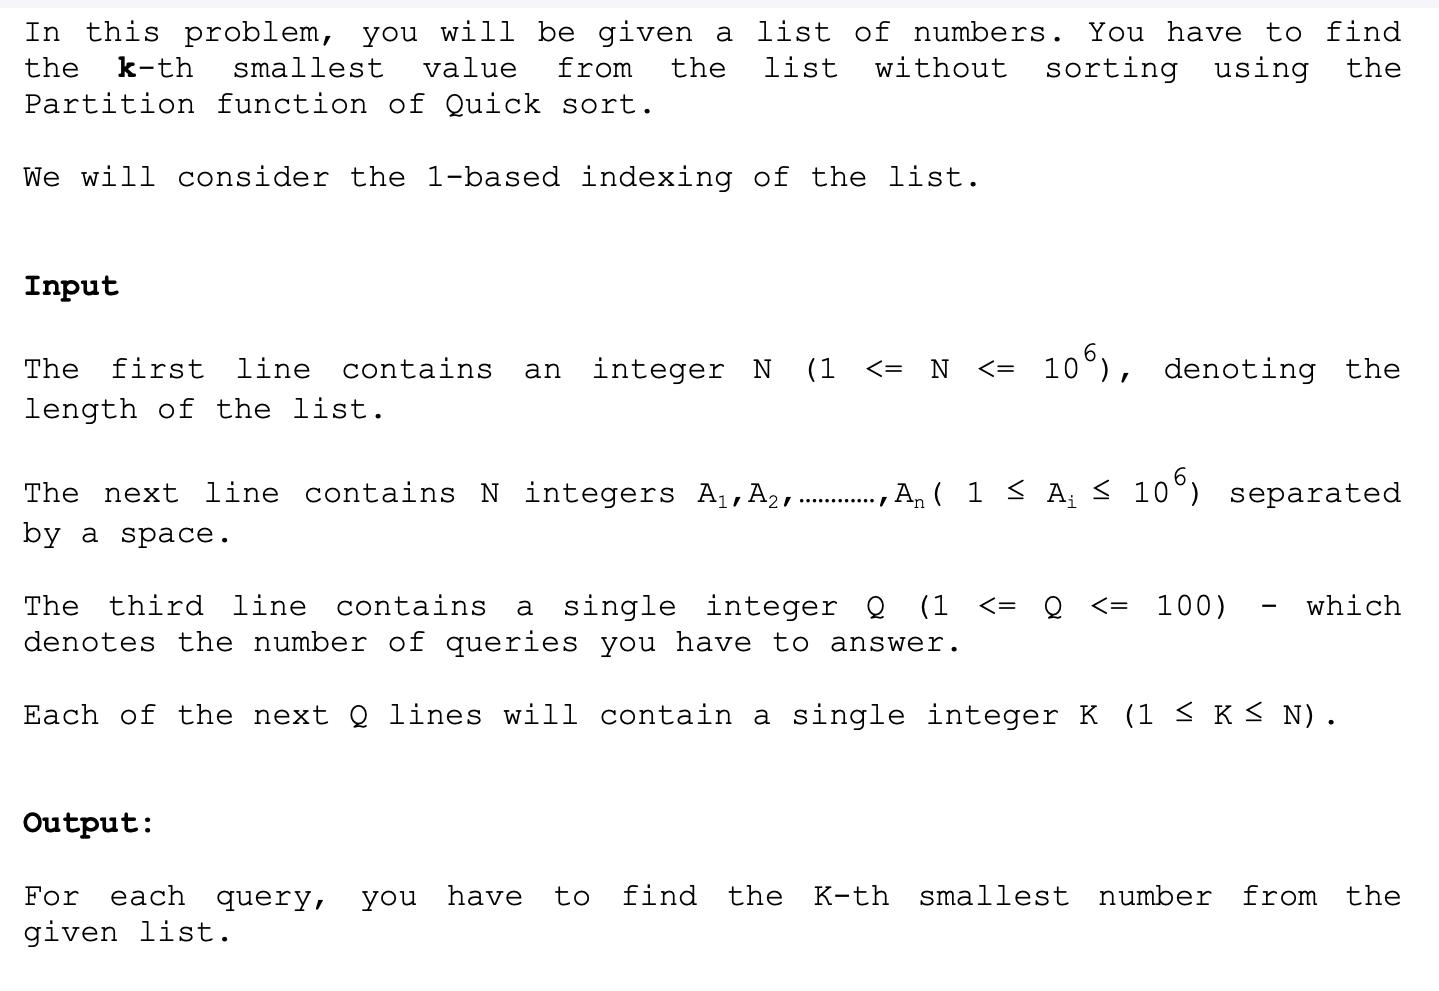 In this problem, you will be given a list of numbers. You have to find the k-th smallest value from the list